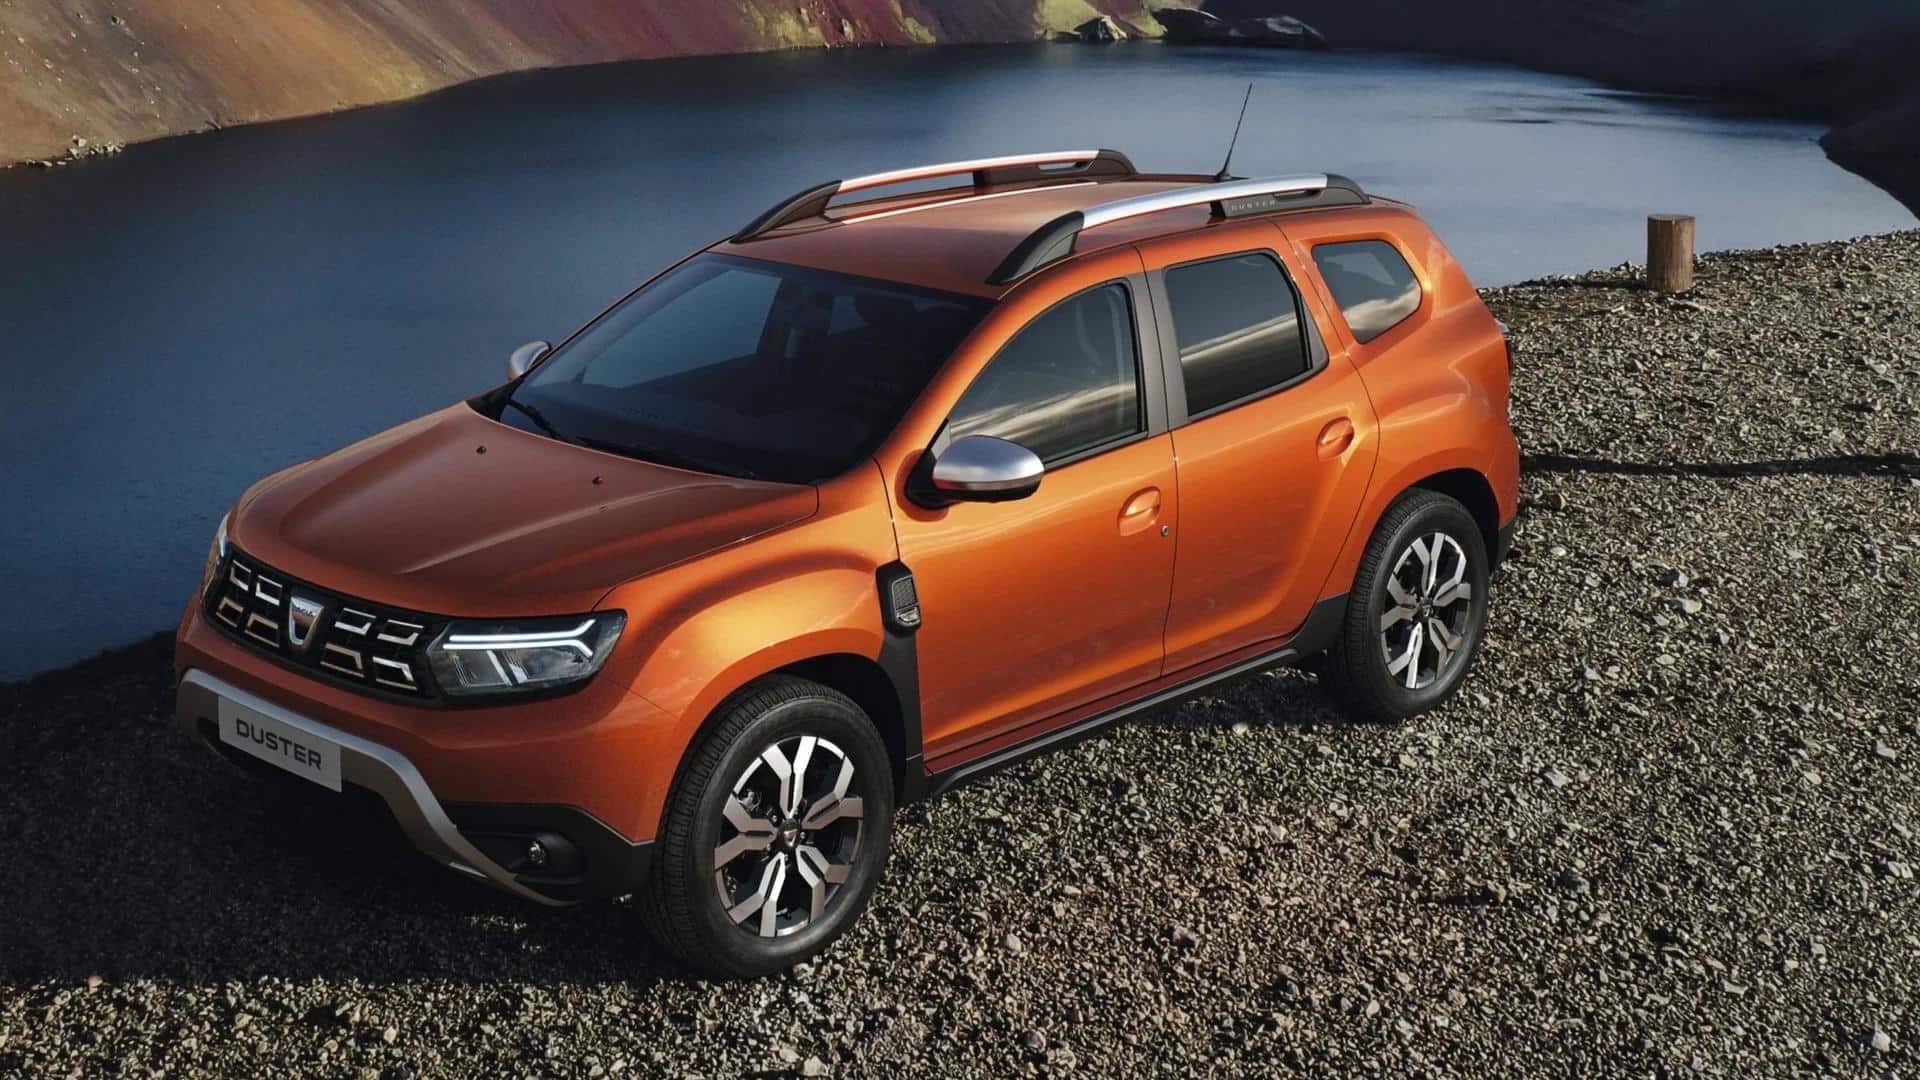 Refreshed Dacia (Renault) duster revealed